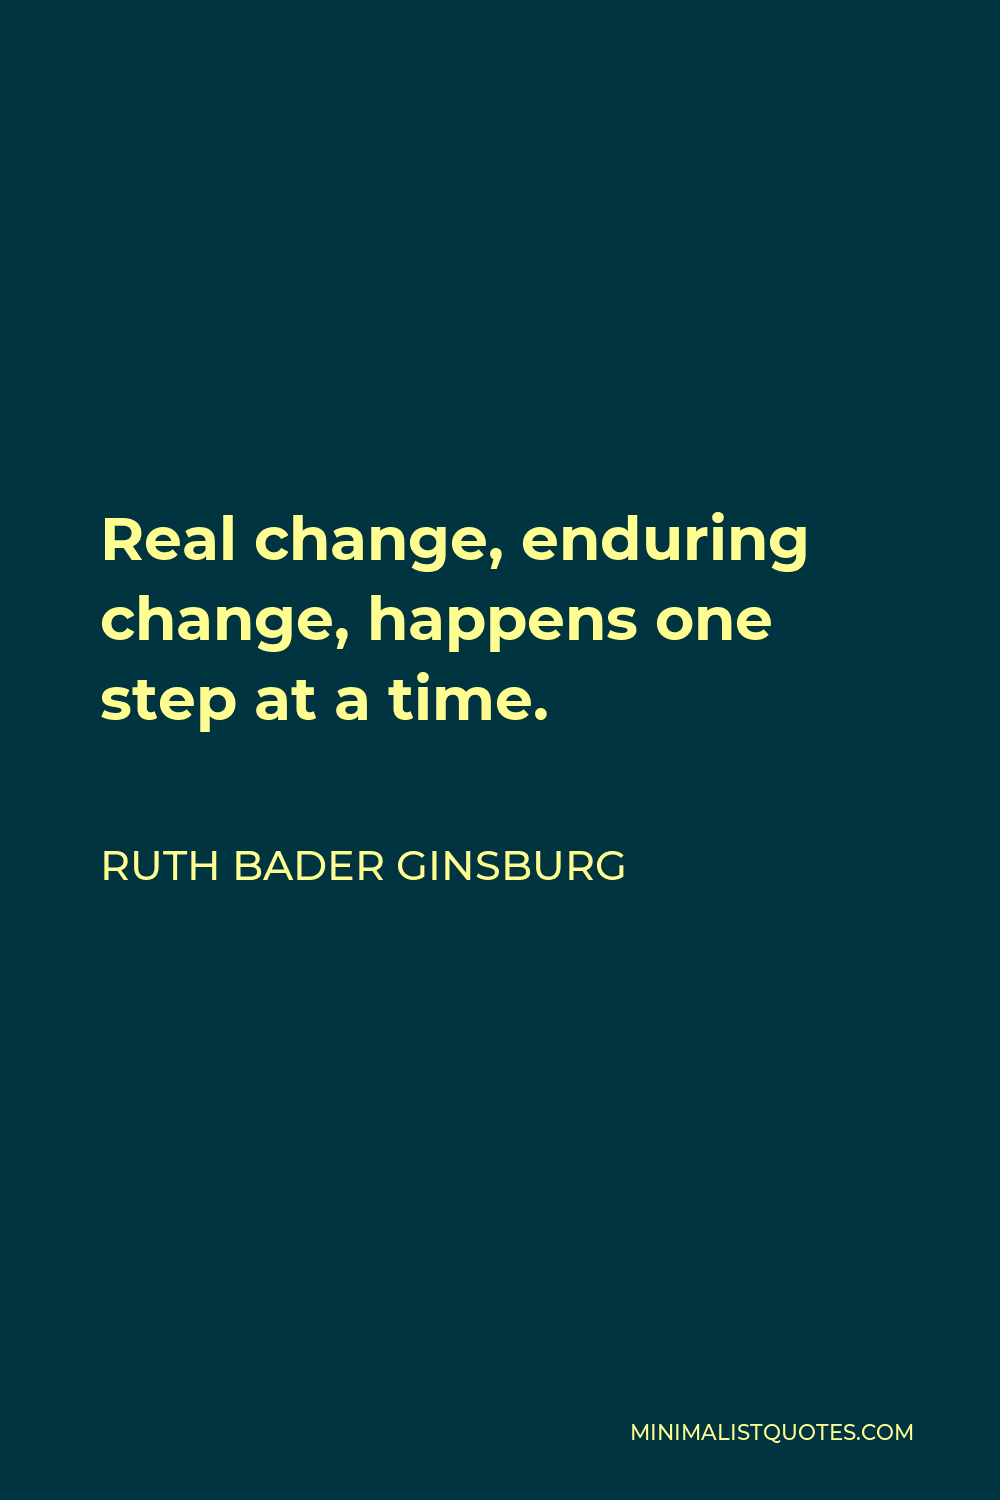 Ruth Bader Ginsburg Quote: Real change, enduring change, happens one ...